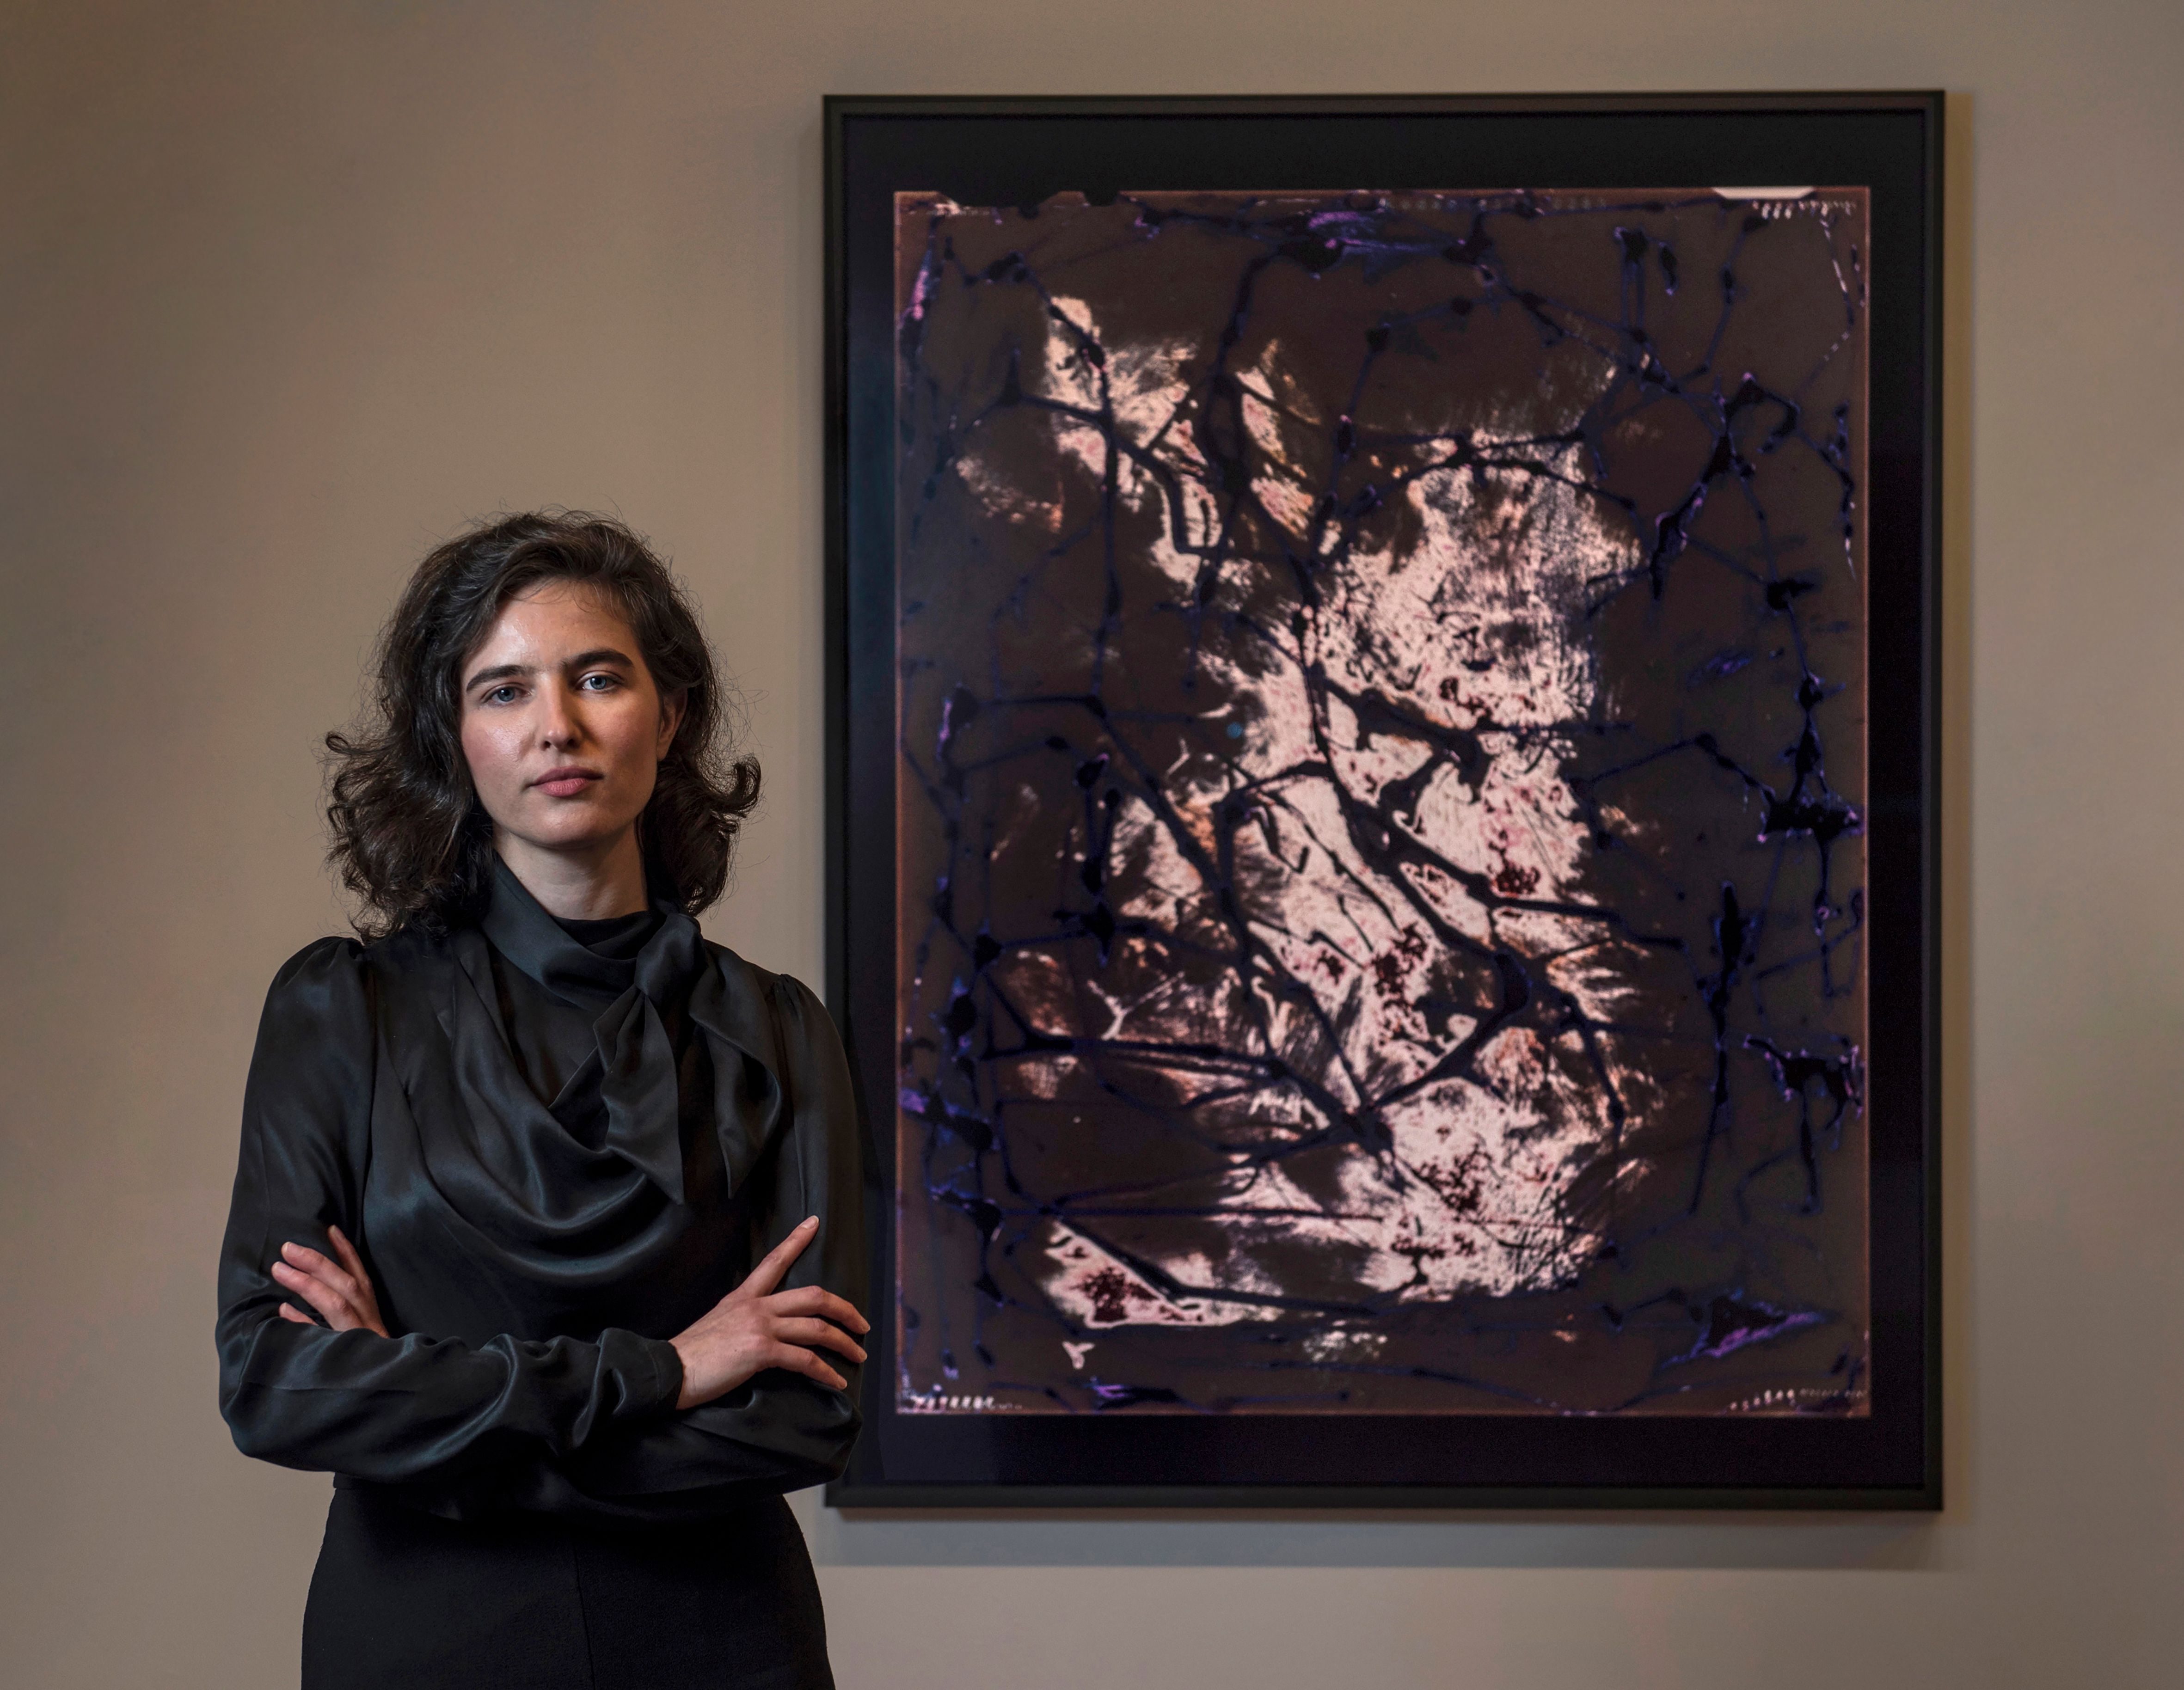 A woman wearing a black shirt looks at the camera with arms crossed. She is standing next to an abstract artwork.